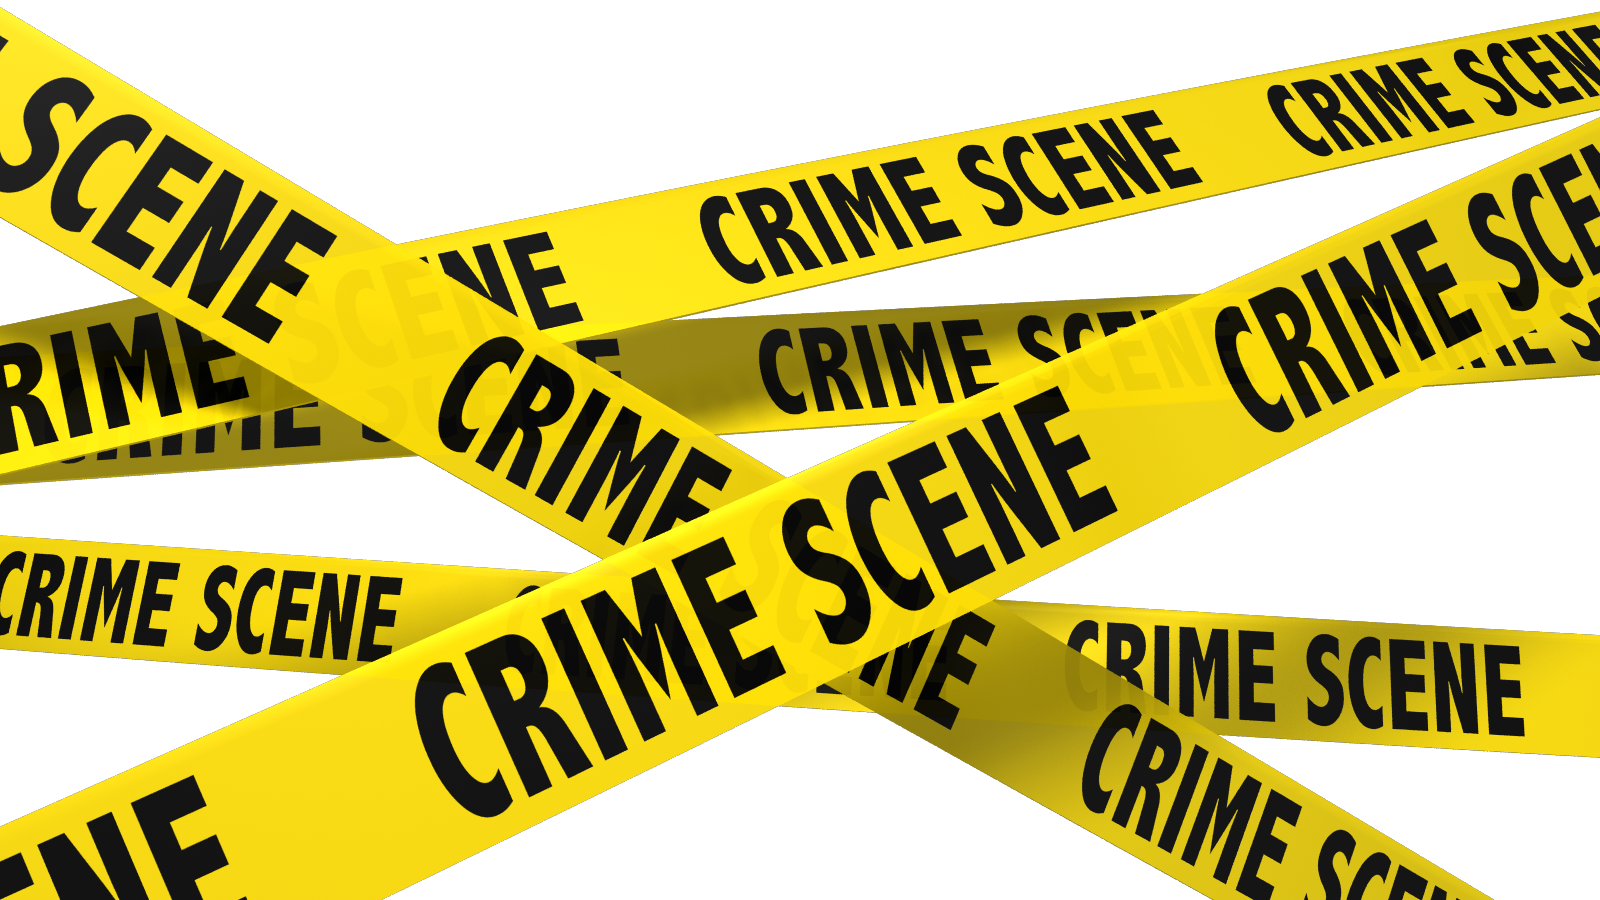 Police Caution Tape PNG Clipart Background